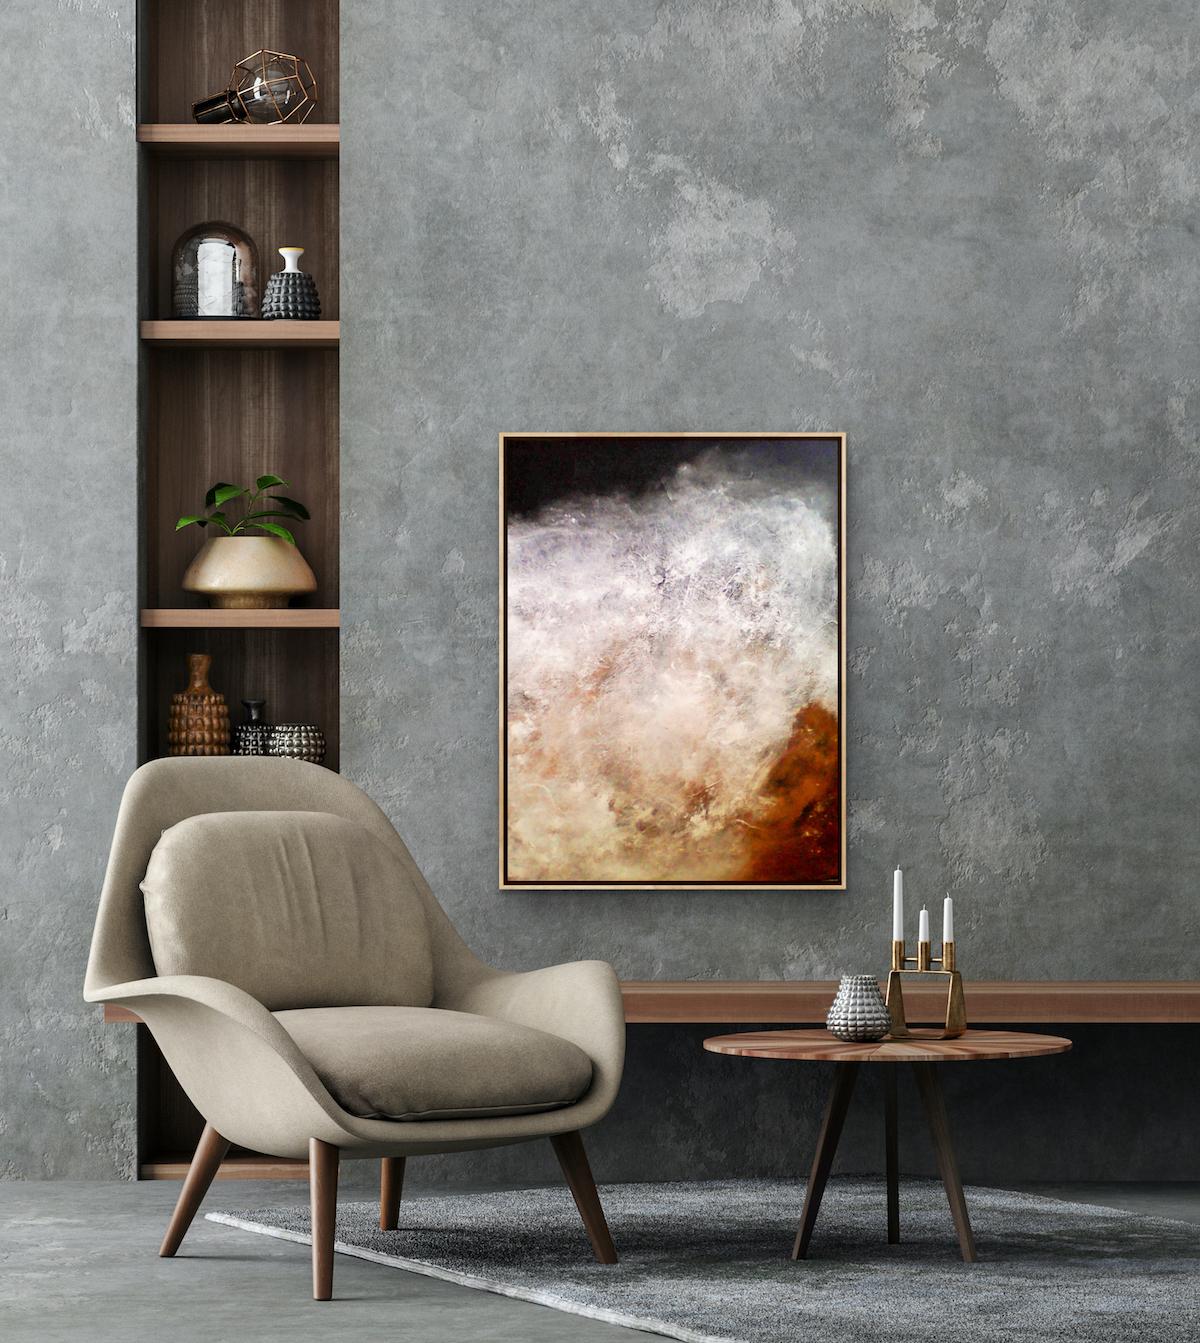 Evanescent Terrain by Candy James [2022]
original and hand signed by the artist 
Cotswold Natural Earth Pigments, Pure Pigments, Charcoal and Diamond Duston Canvas
Image size: H:100 cm x W:100 cm
Complete Size of Unframed Work: H:100 cm x W:100 cm x